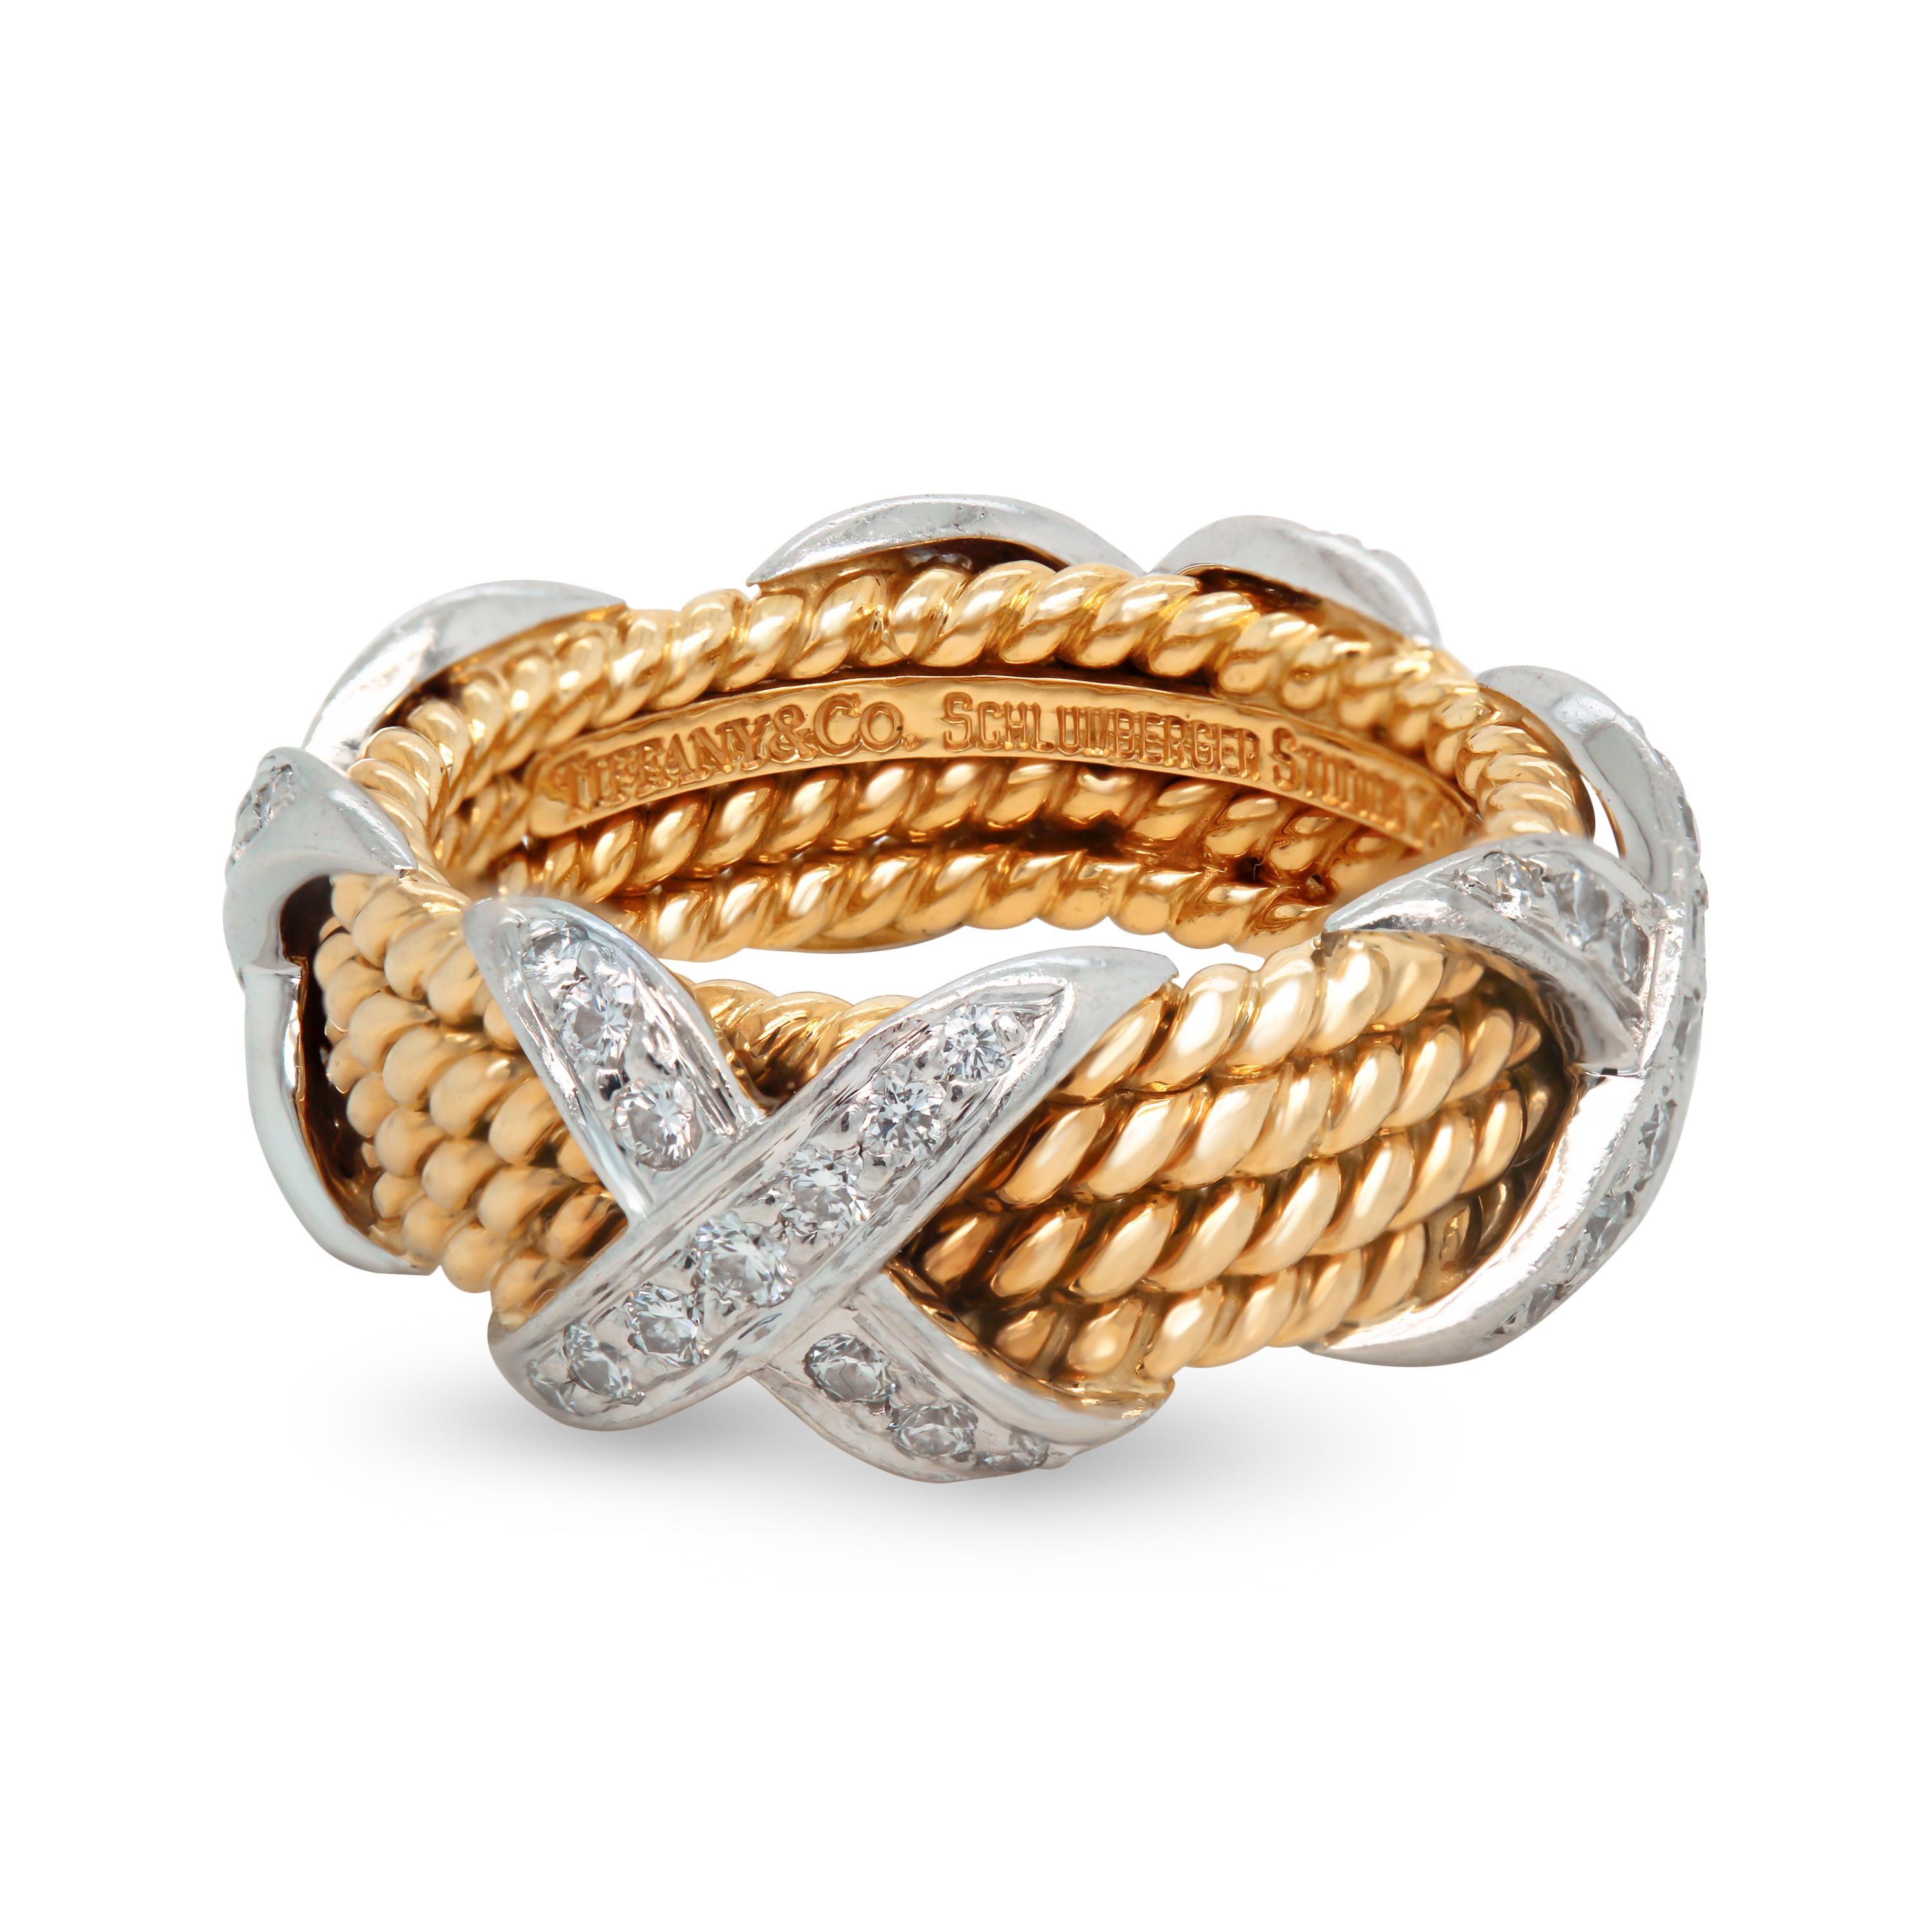 Tiffany & Co. Schlumberger 18K Gold Platinum Diamonds Rope Four-row X Ring

0.54 carat G color, VS clarity diamonds total weight

The four row rope, X ring.

$7,500 MSRP by Tiffany & Co.

8.2mm band width.

Size 6. Ring is in mint condition.
